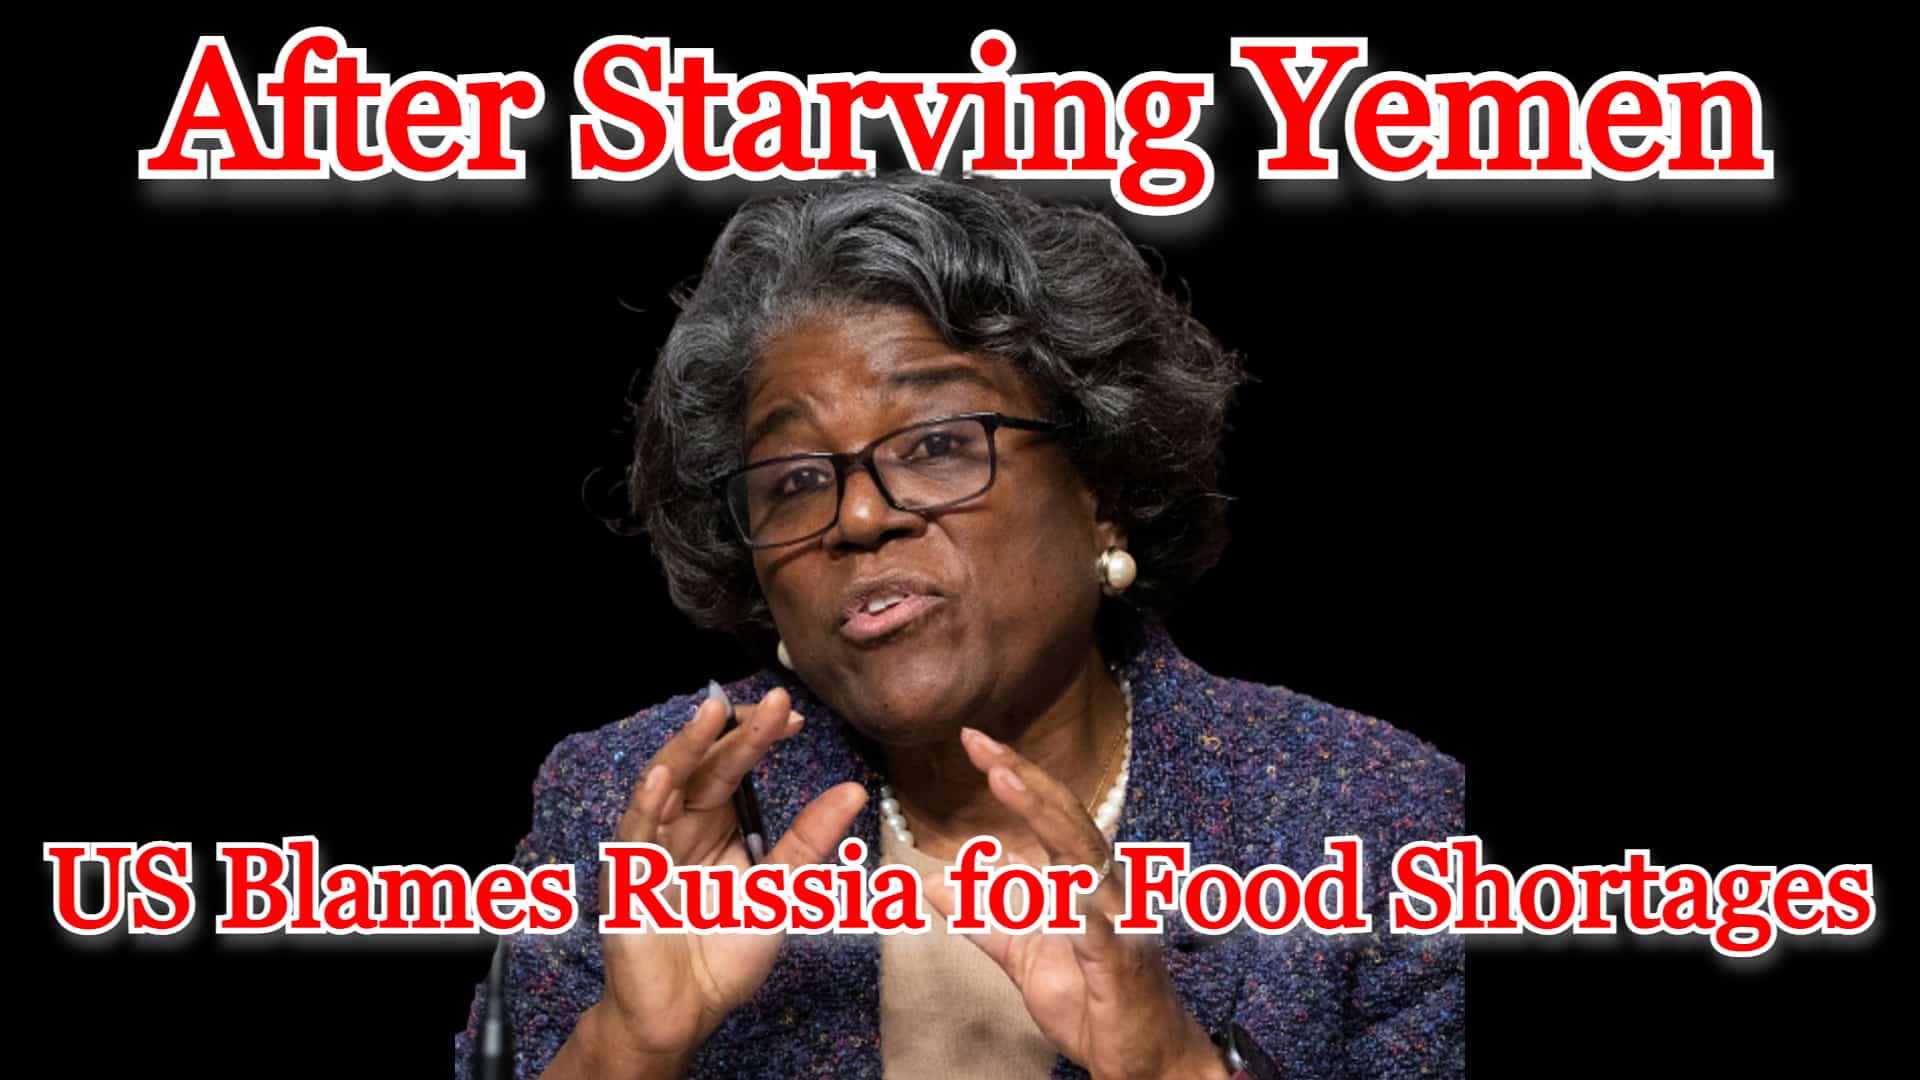 COI #263: After Starving Yemen for Years, US Blames Russia for Food Shortages